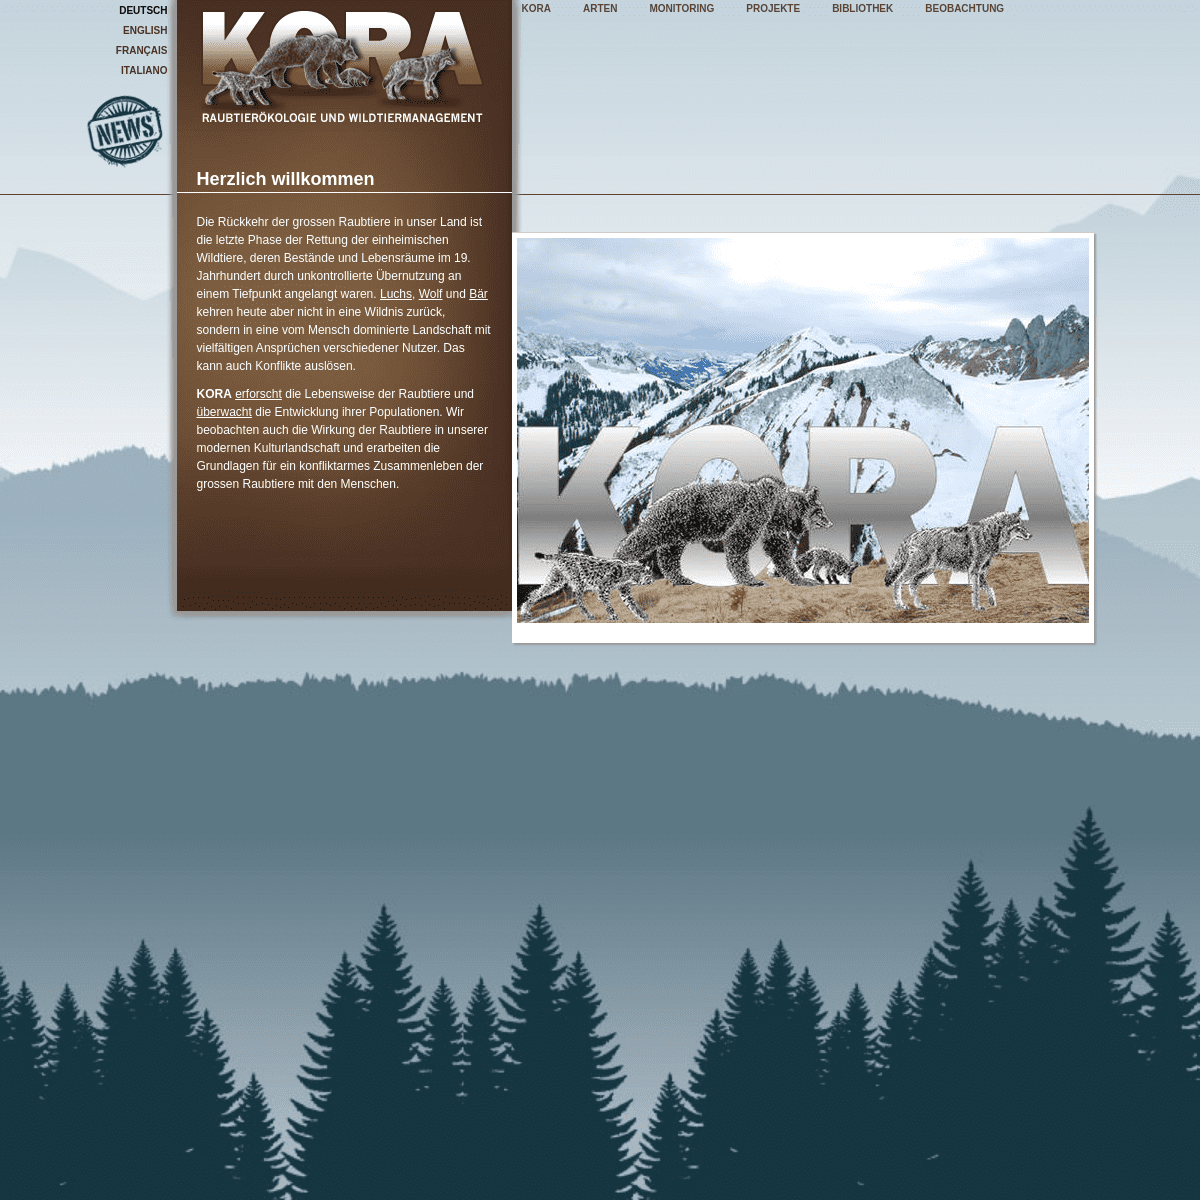 A complete backup of https://kora.ch